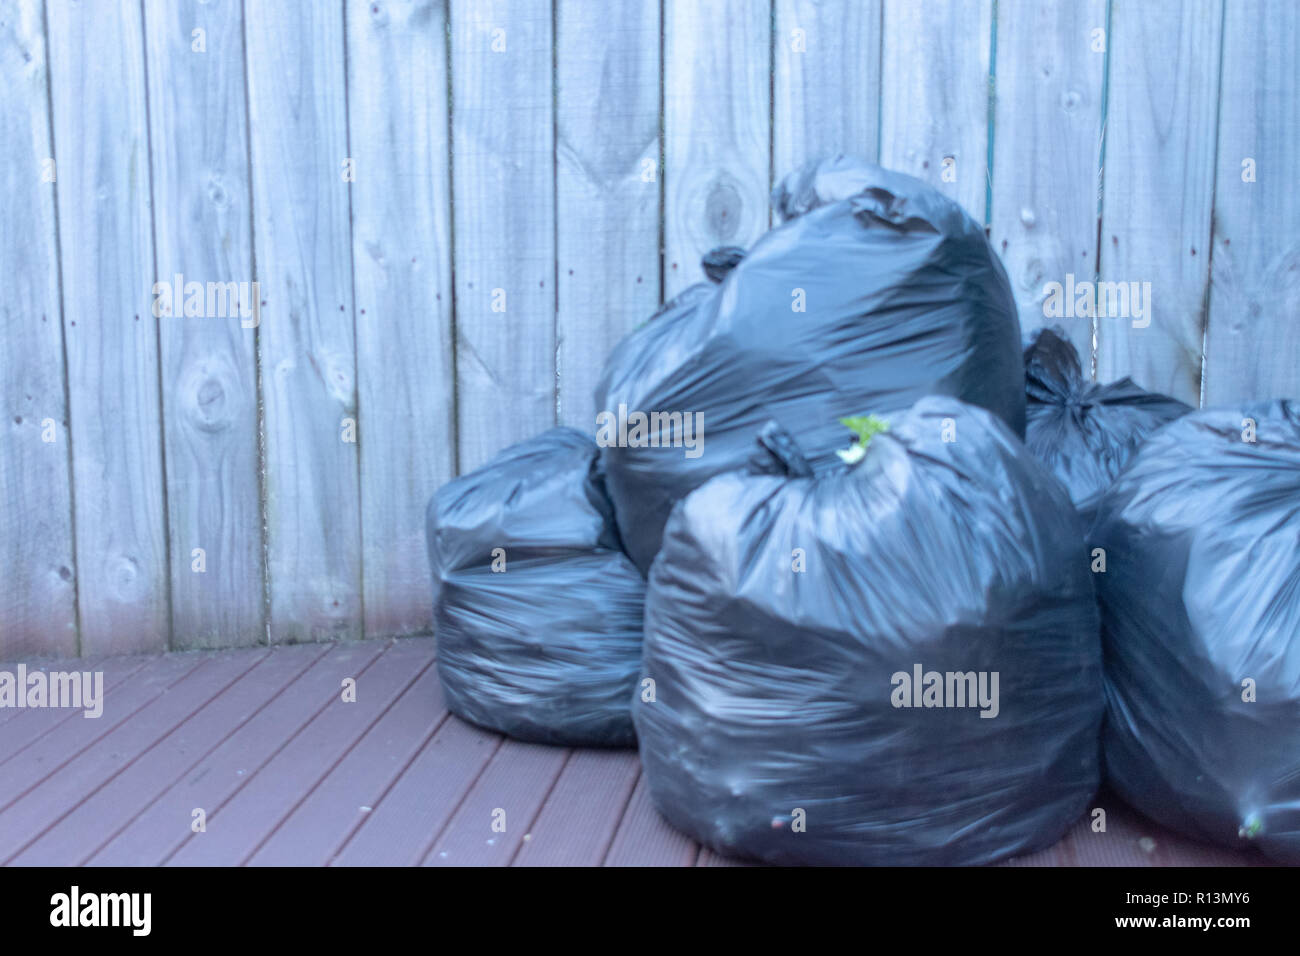 https://c8.alamy.com/comp/R13MY6/horizontal-image-of-three-black-plastic-garbage-bags-packed-and-ready-to-take-out-sitting-on-the-deck-against-a-wooden-fence-R13MY6.jpg